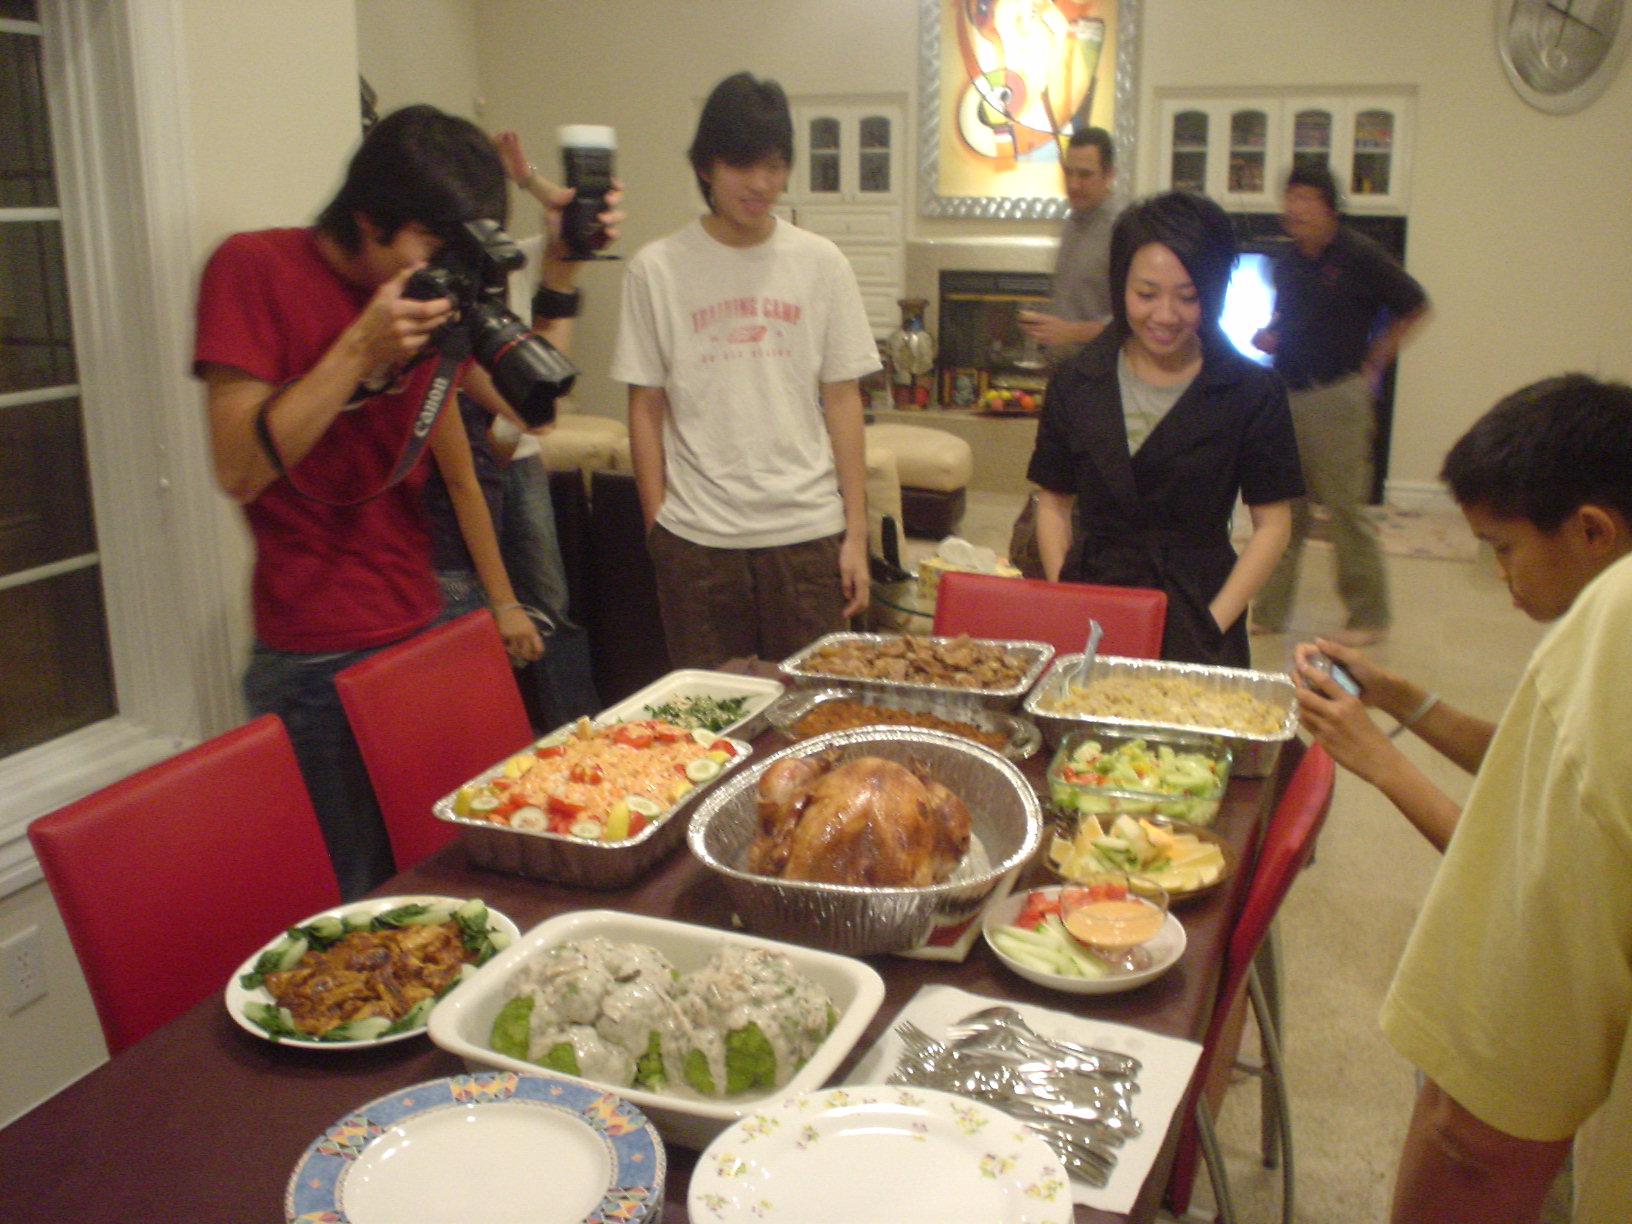 several people surrounding a table covered in plates and pans